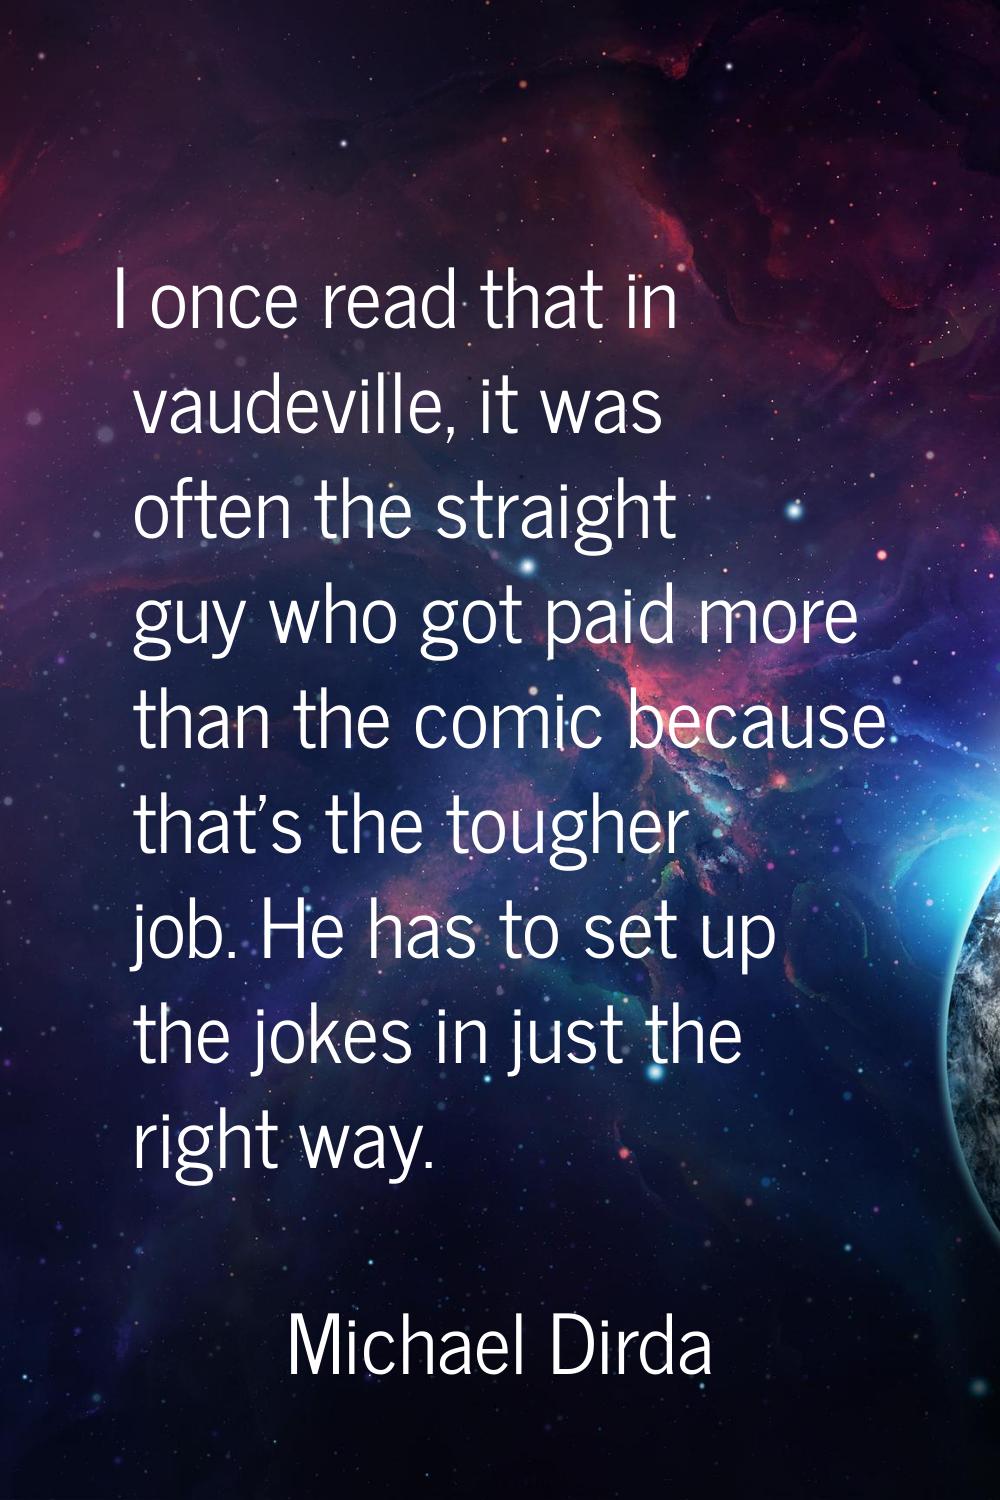 I once read that in vaudeville, it was often the straight guy who got paid more than the comic beca